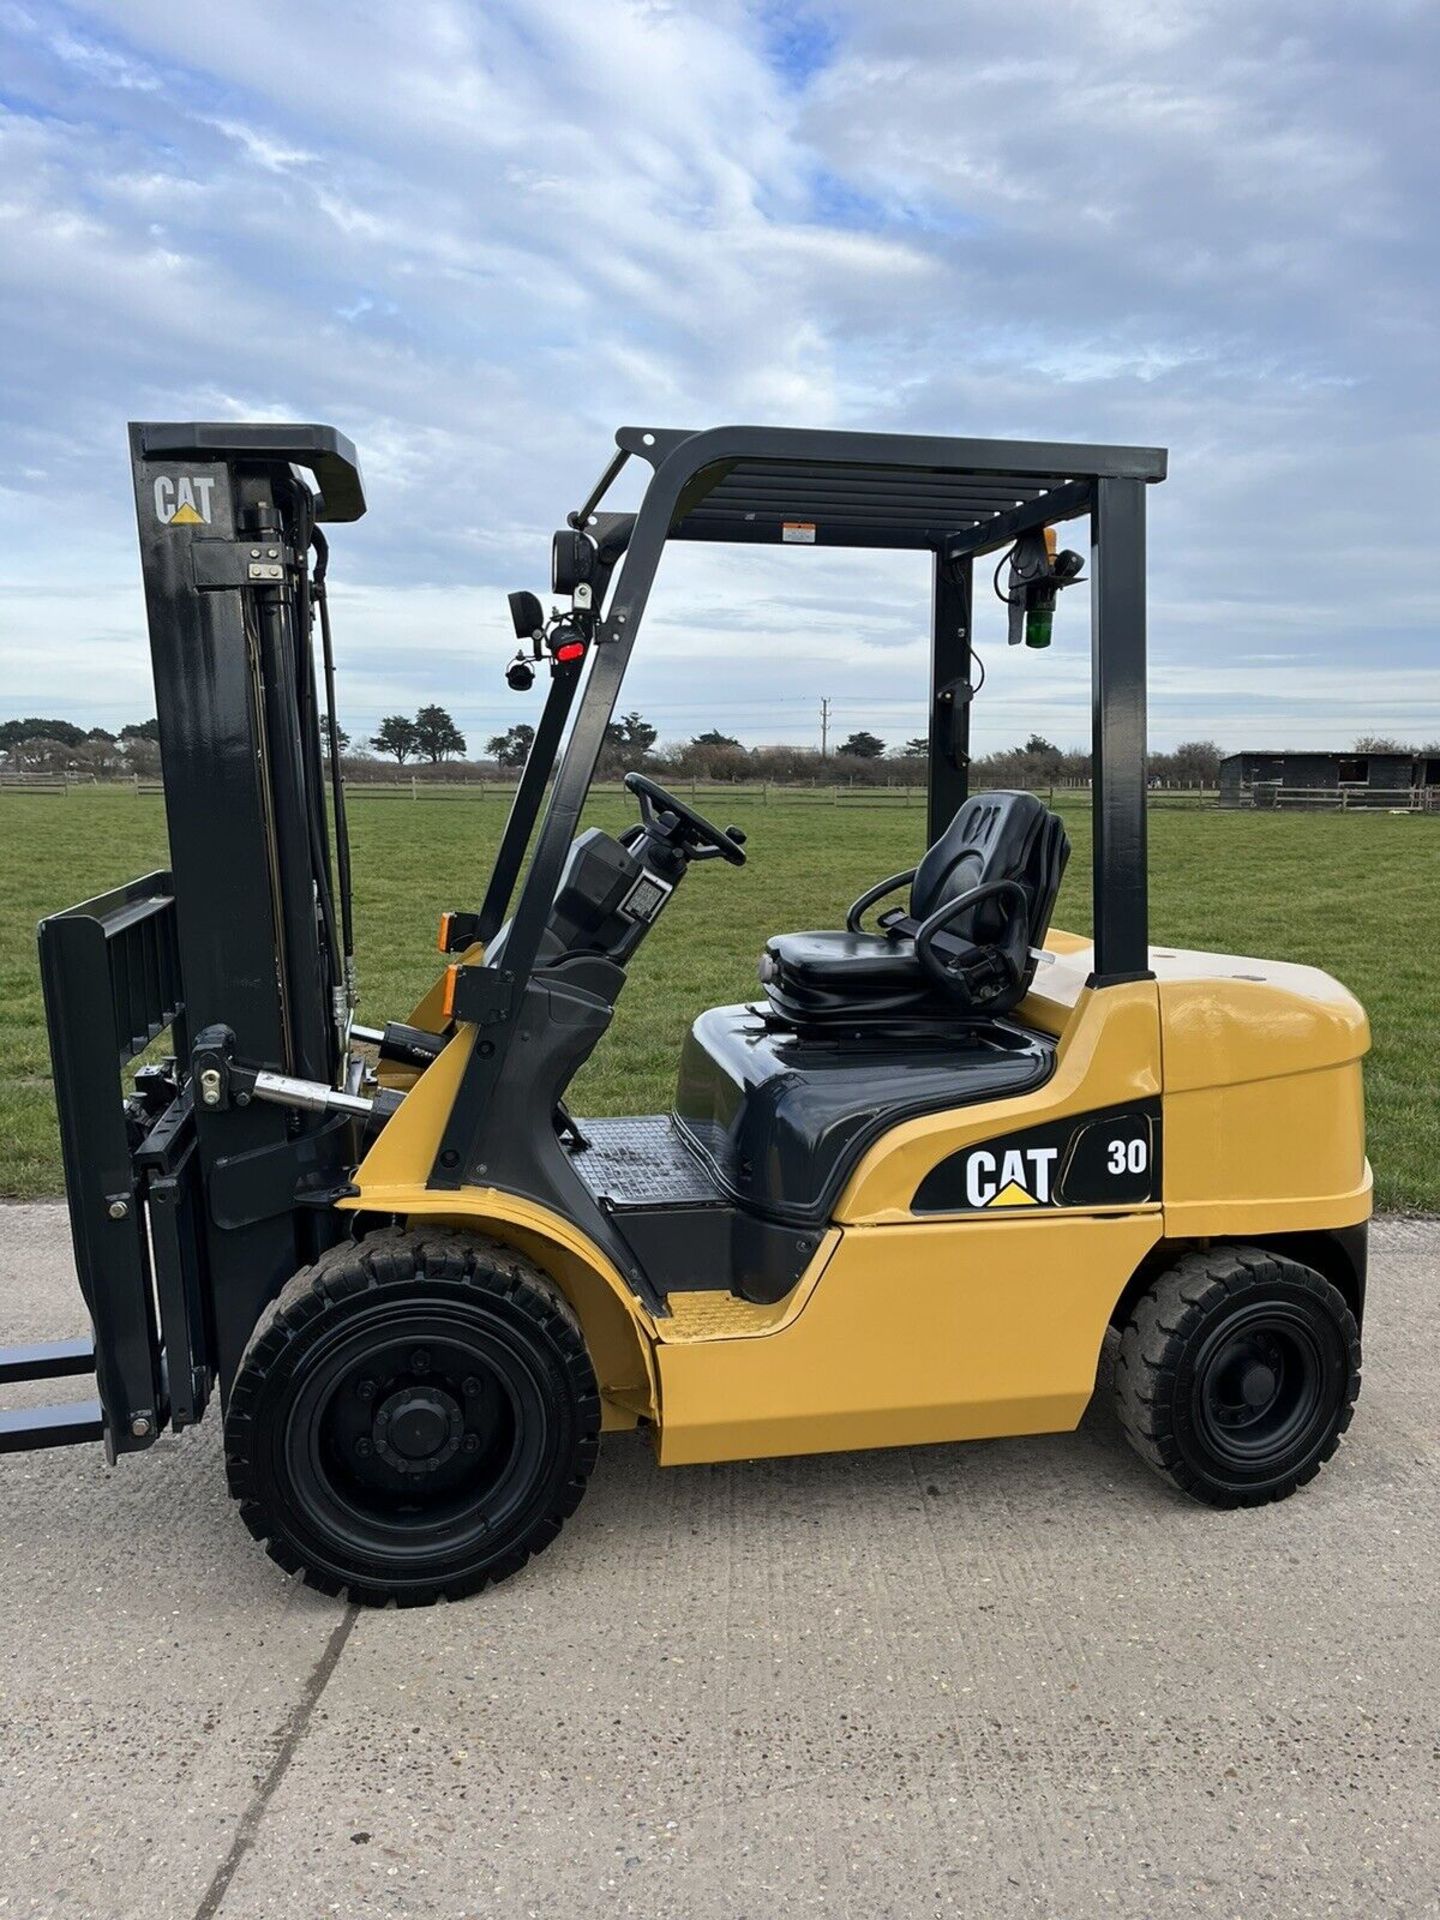 2015 Caterpillar Forklift Truck - Container Spec - Image 6 of 6